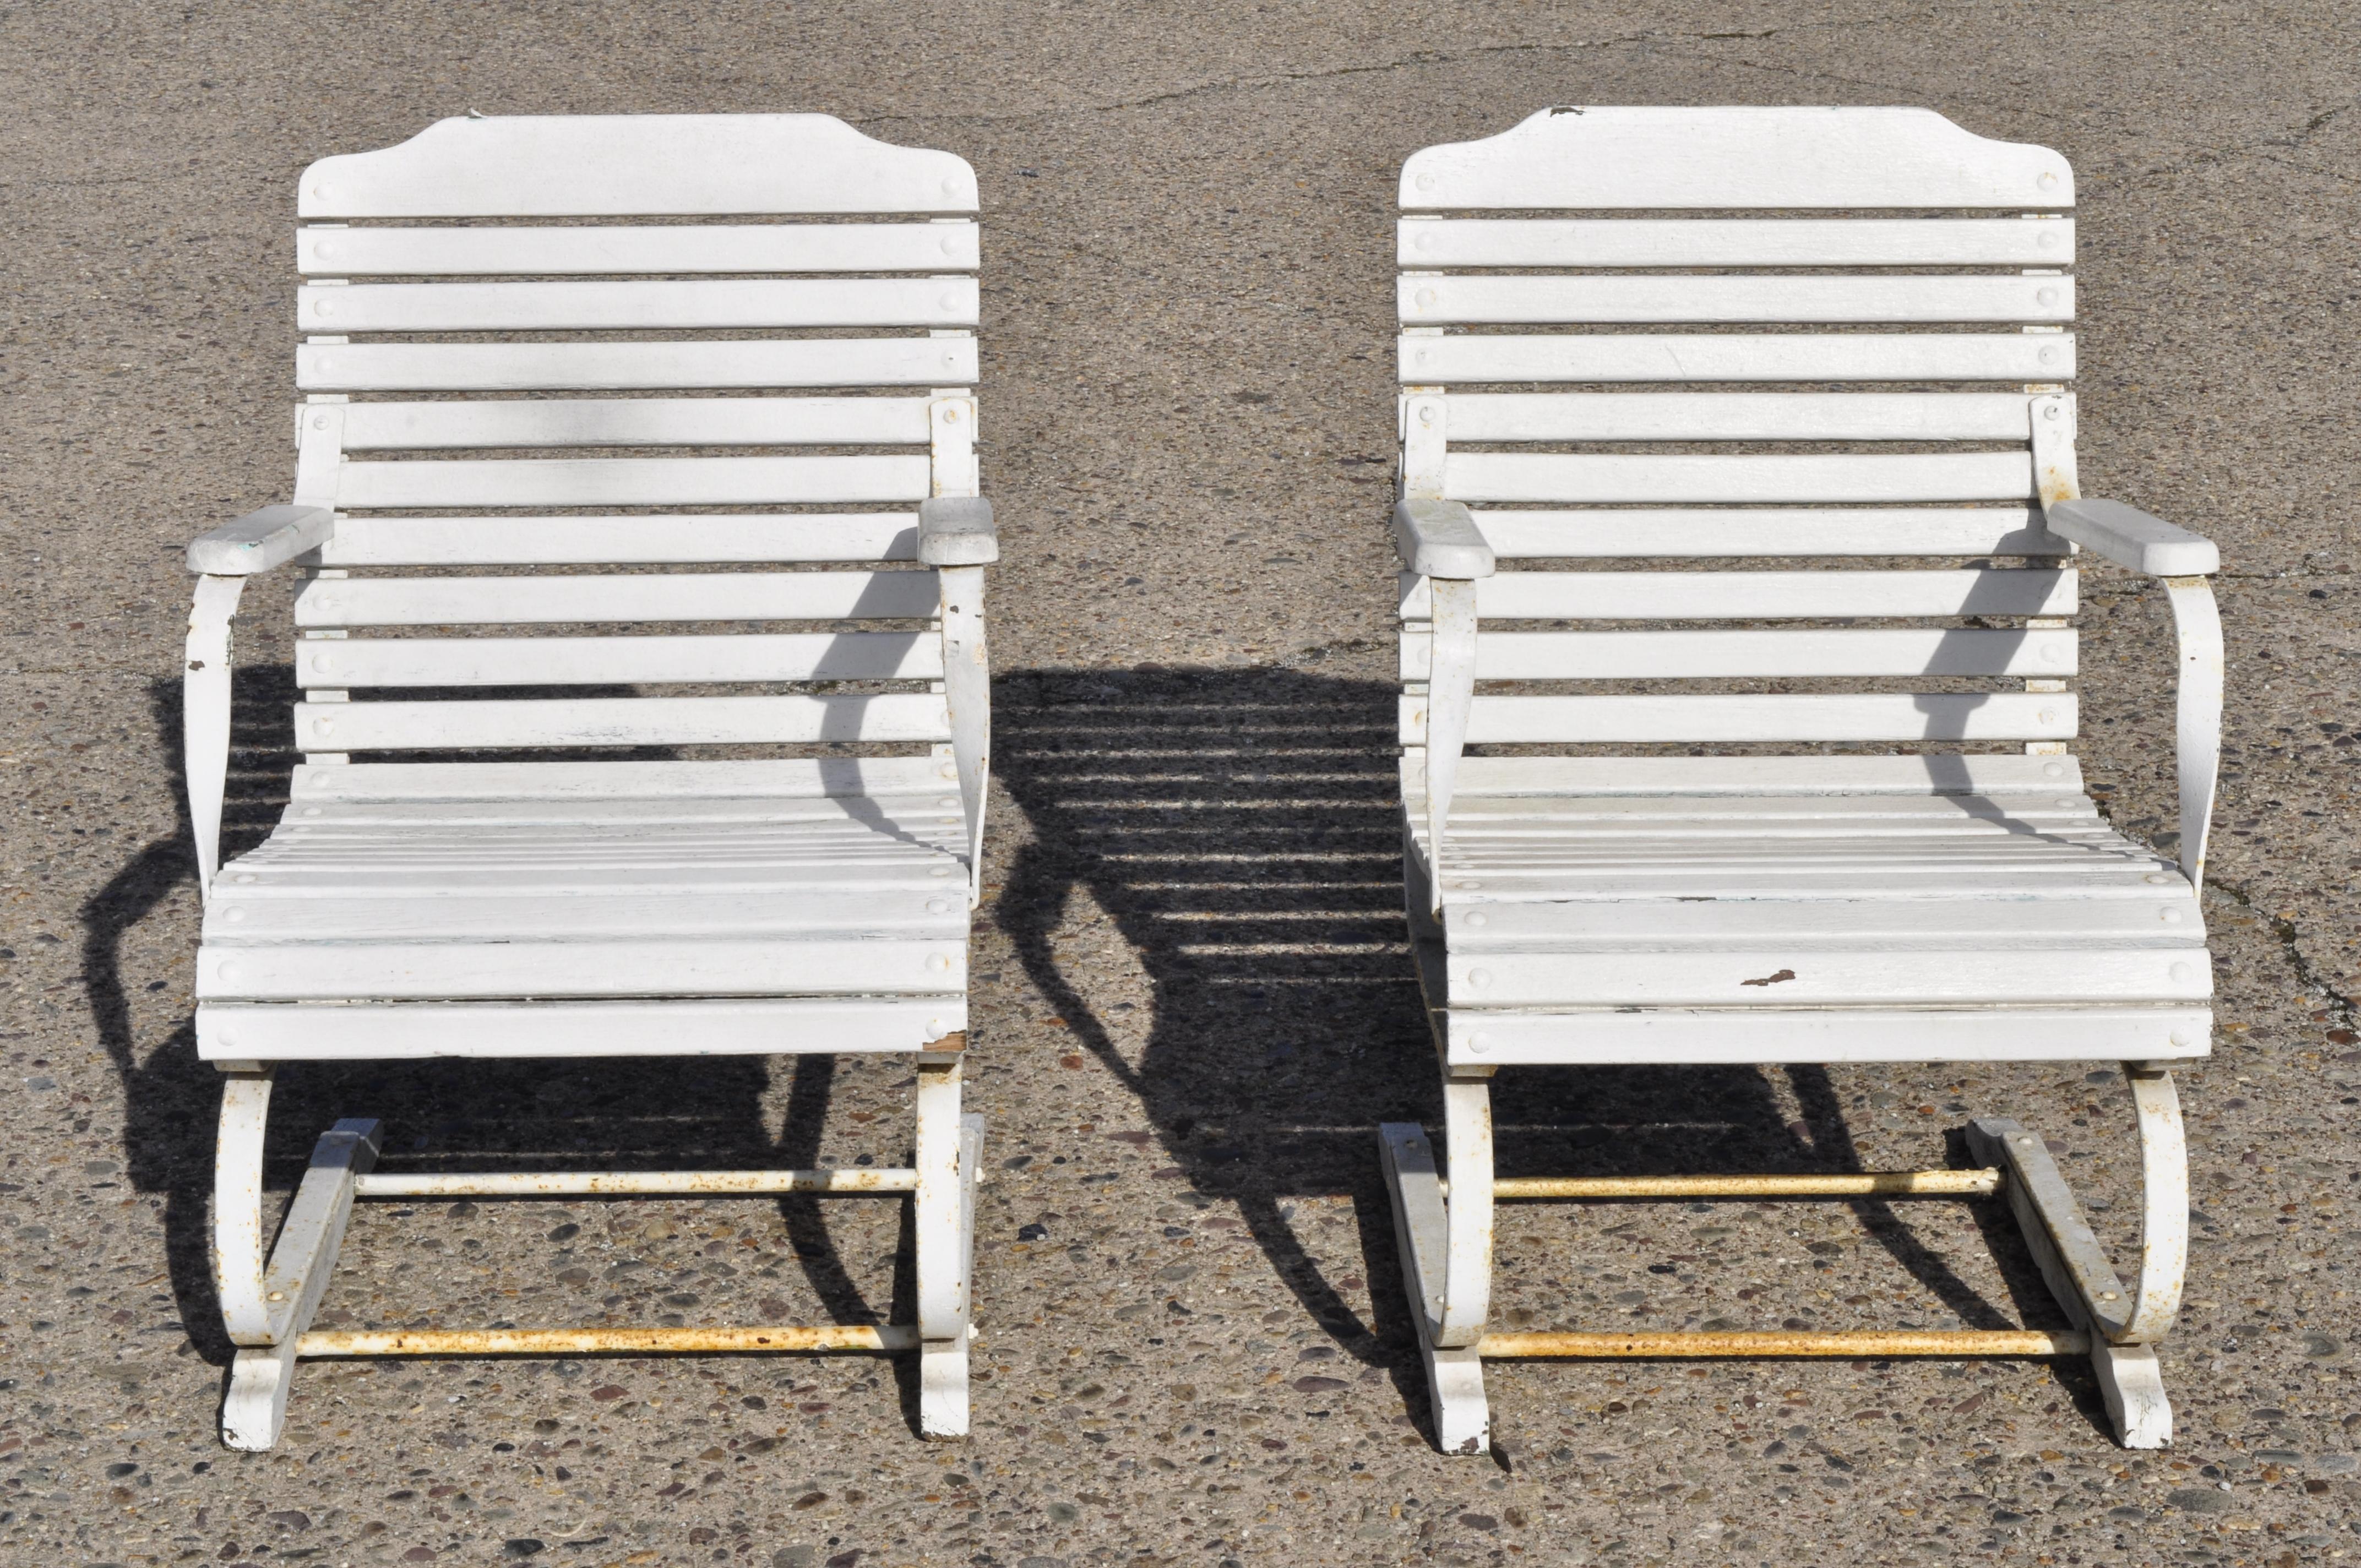 Pair of vintage French country wrought iron and wood slat bouncer garden lounge chairs. Listing includes wooden slat seats, heavy iron frame, very nice antique item, great style and form, circa early to mid-20th century. Measurements: 34